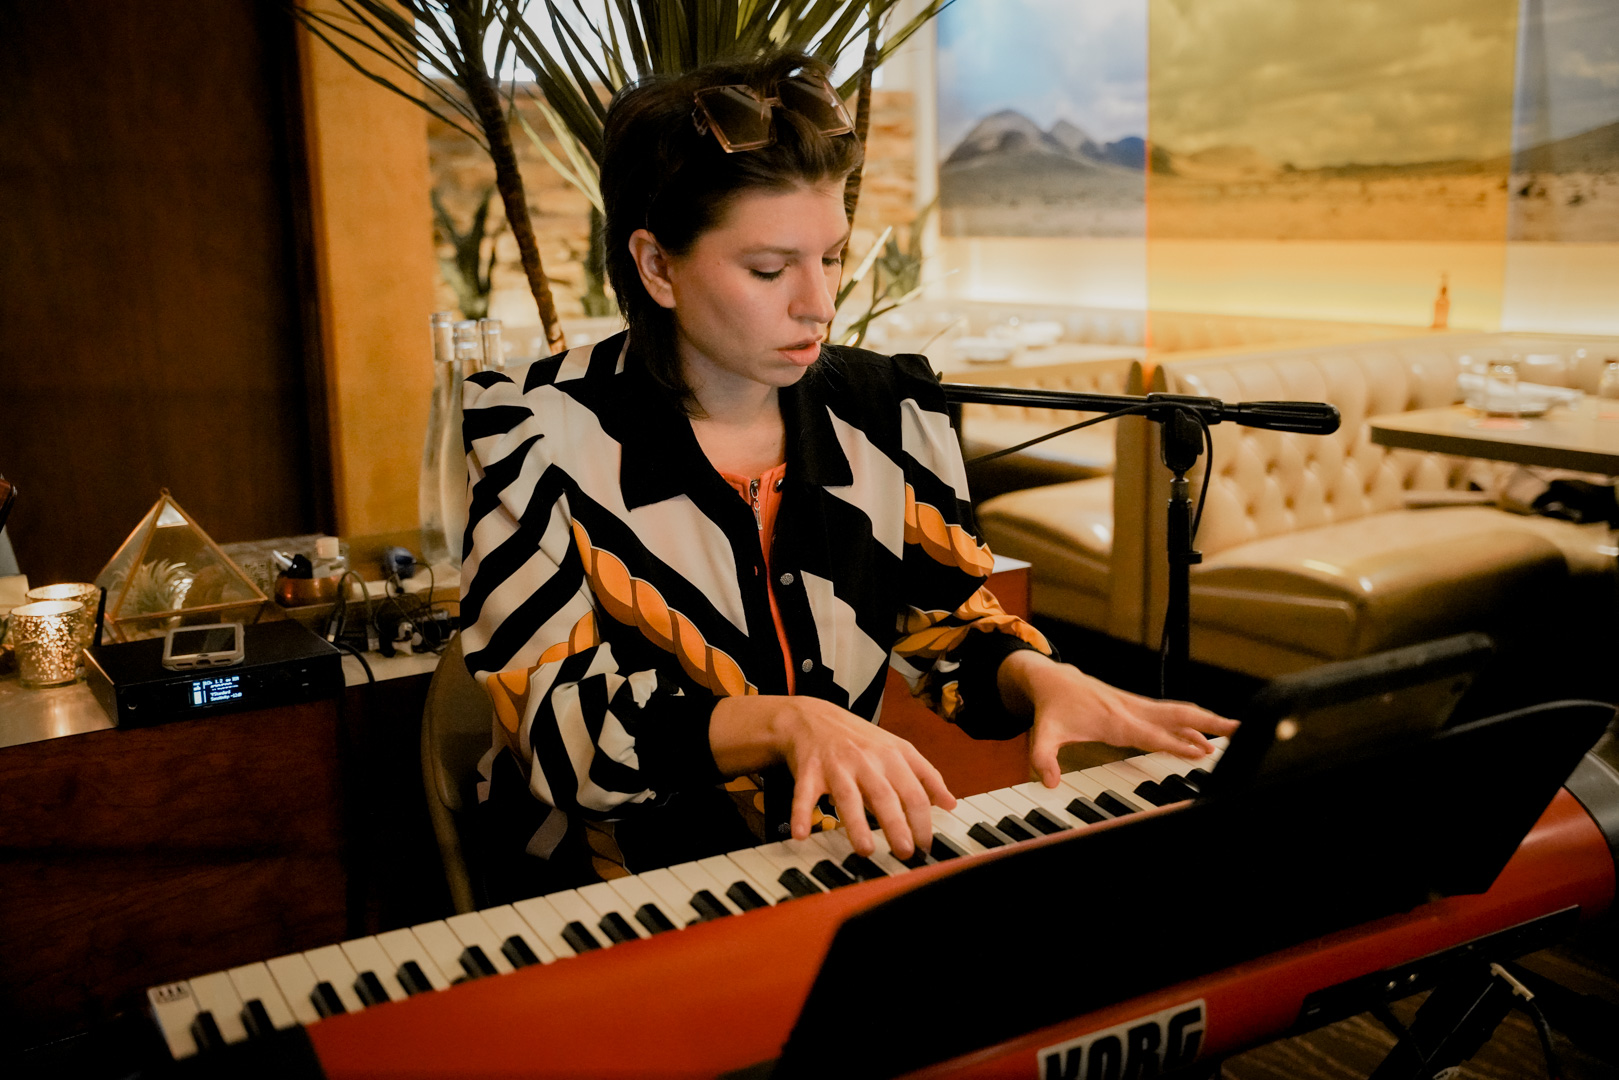 A woman plays keyboard in a lounge